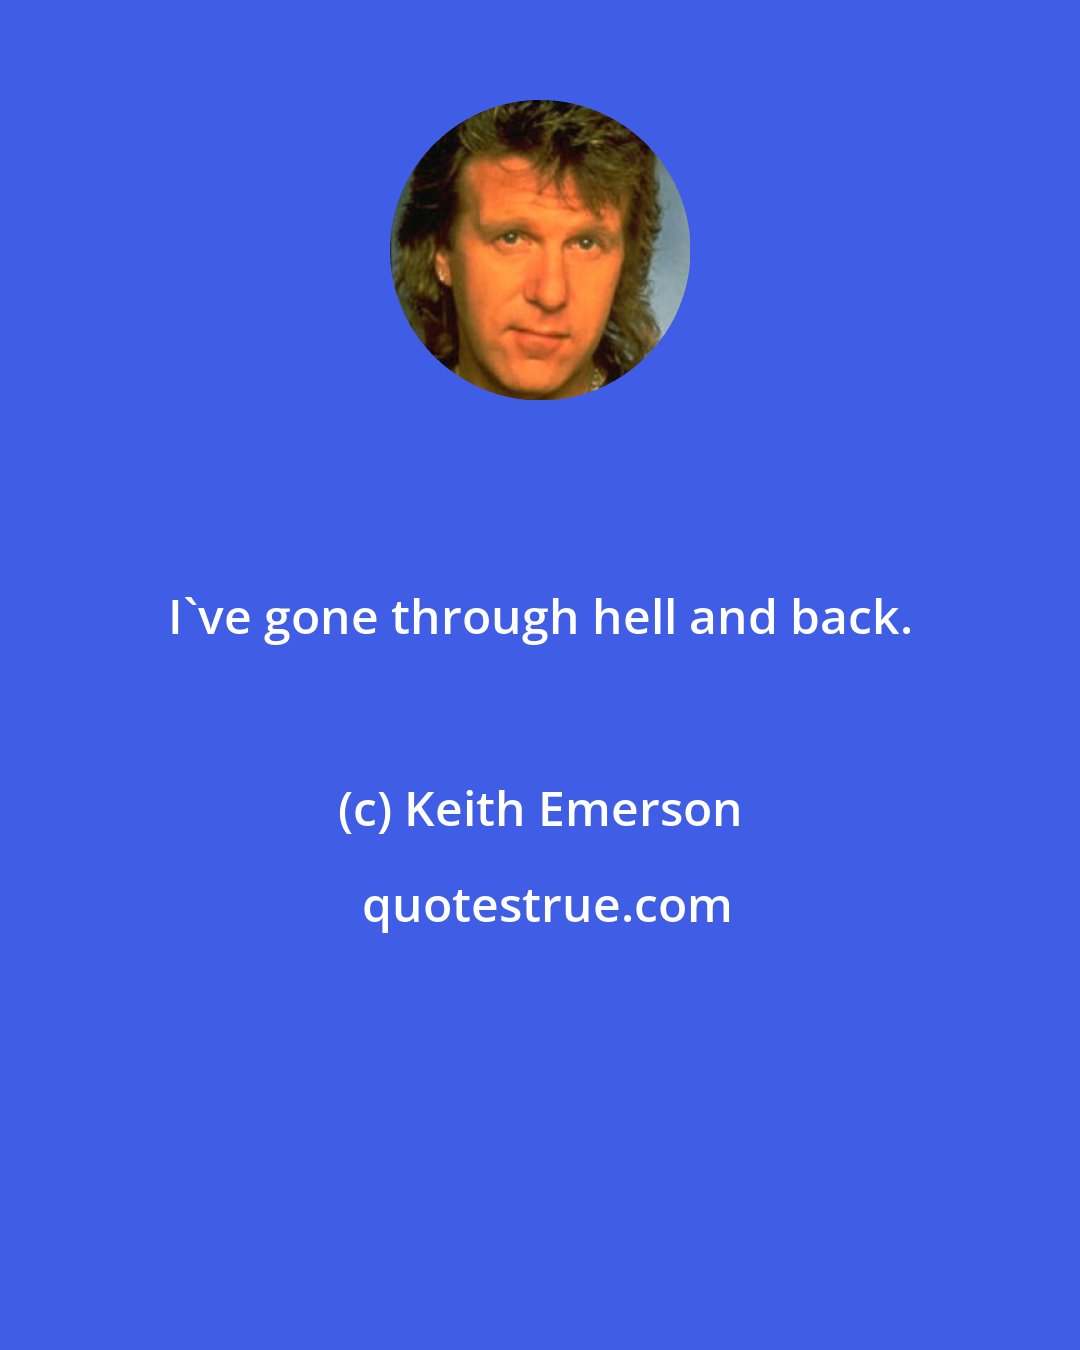 Keith Emerson: I've gone through hell and back.